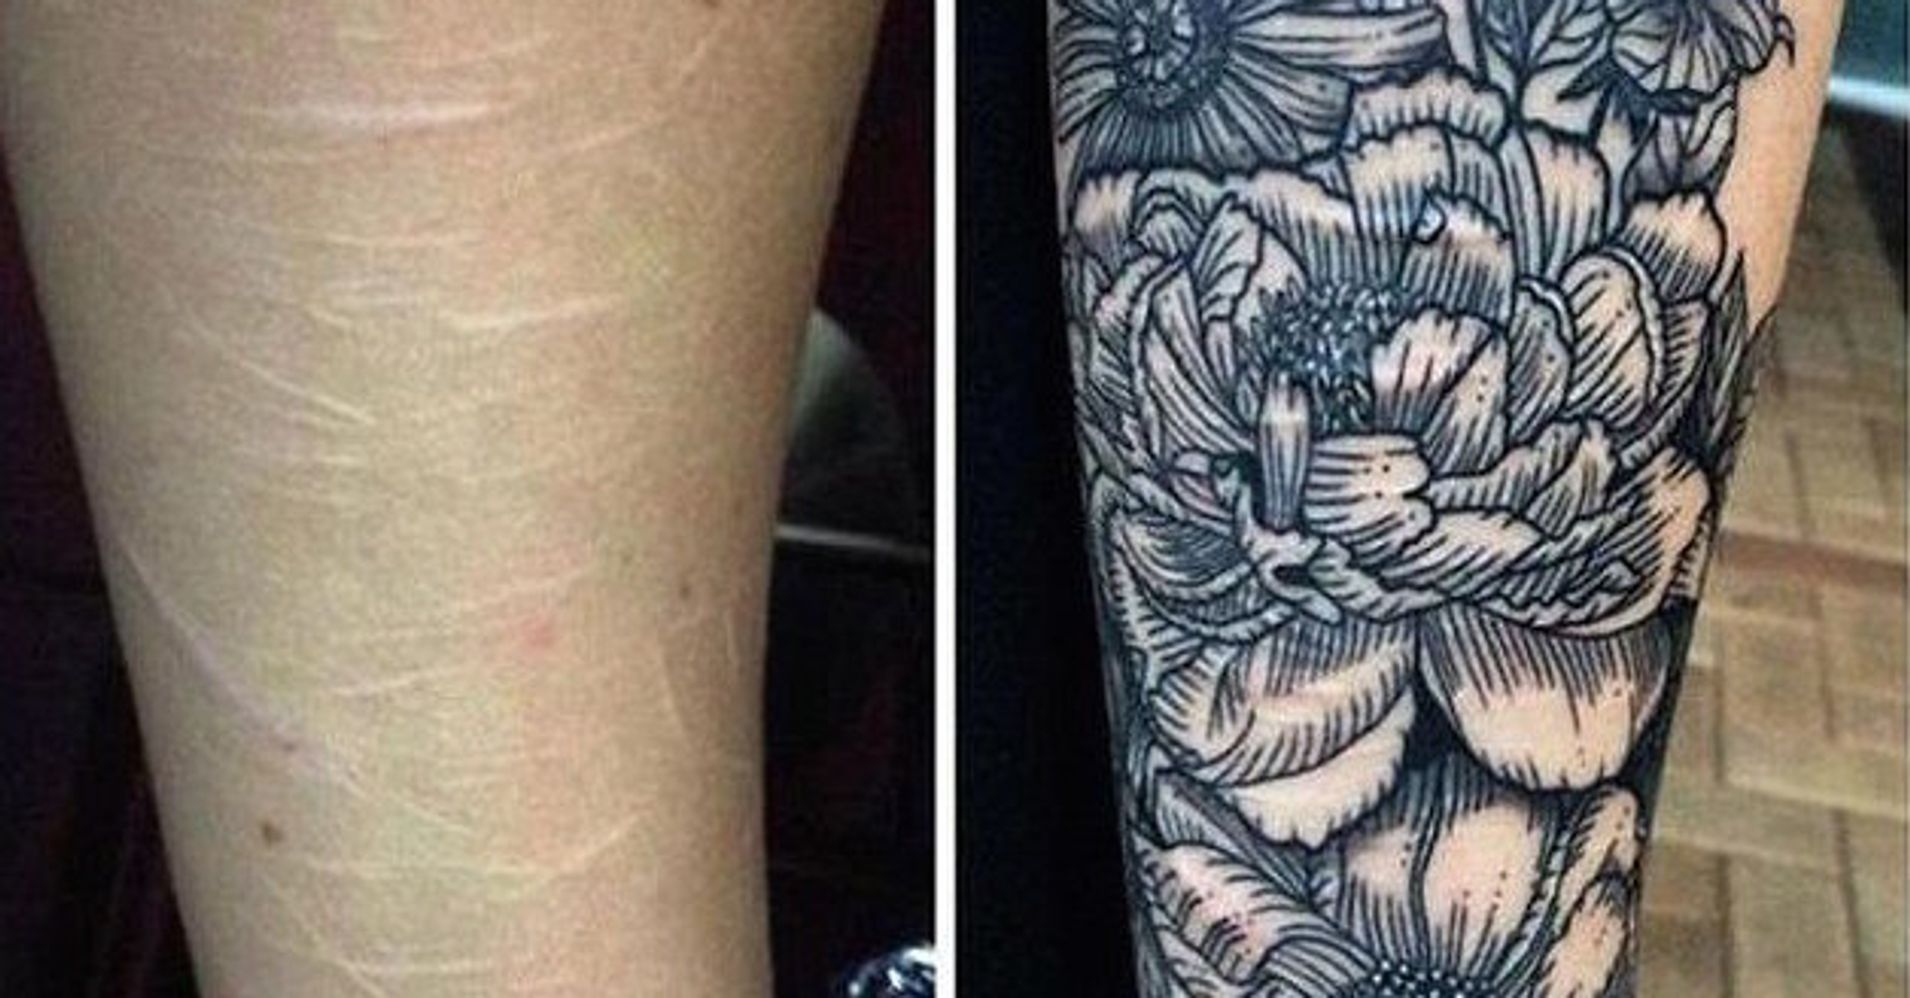 Tattoo Apprentice Turns Scars From SelfHarm Into Incredible Works Of